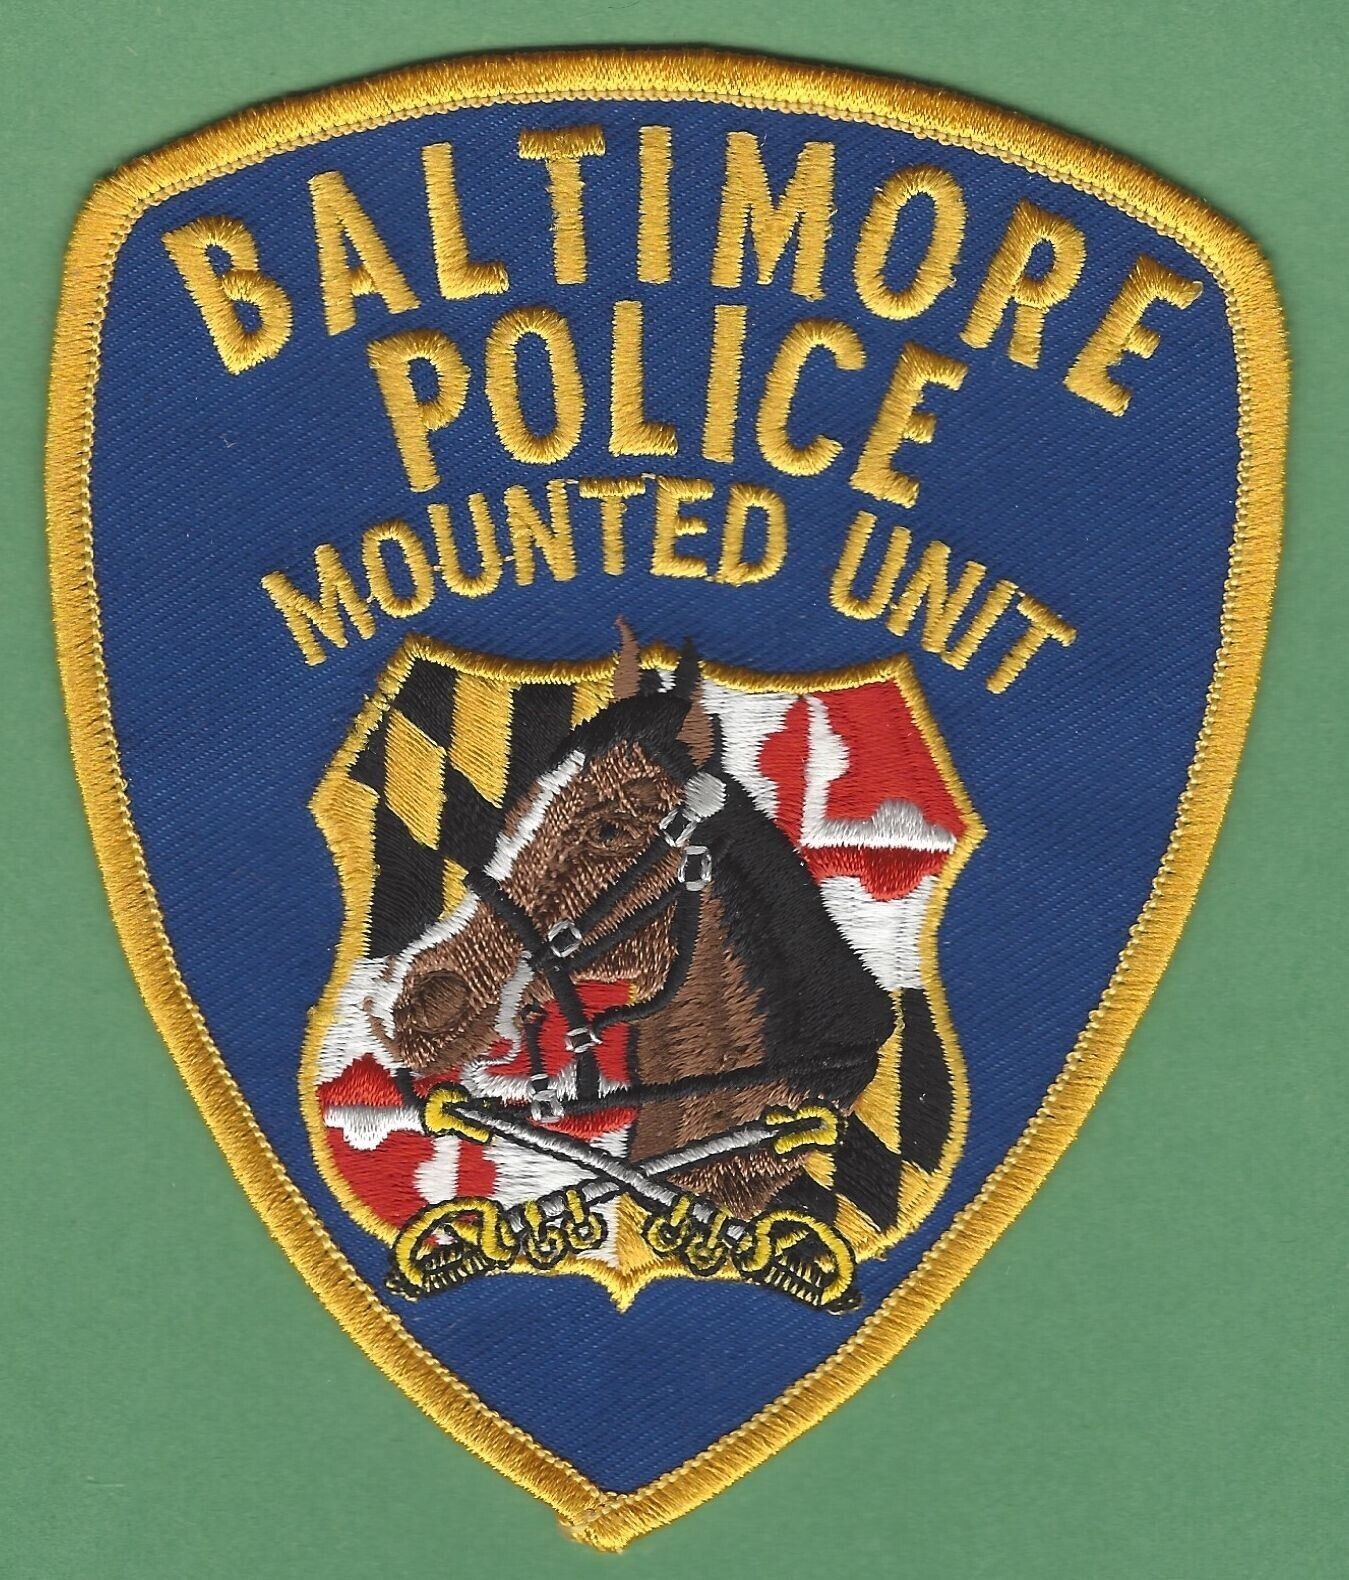 BALTIMORE MARYLAND POLICE MOUNTED UNIT SHOULDER PATCH